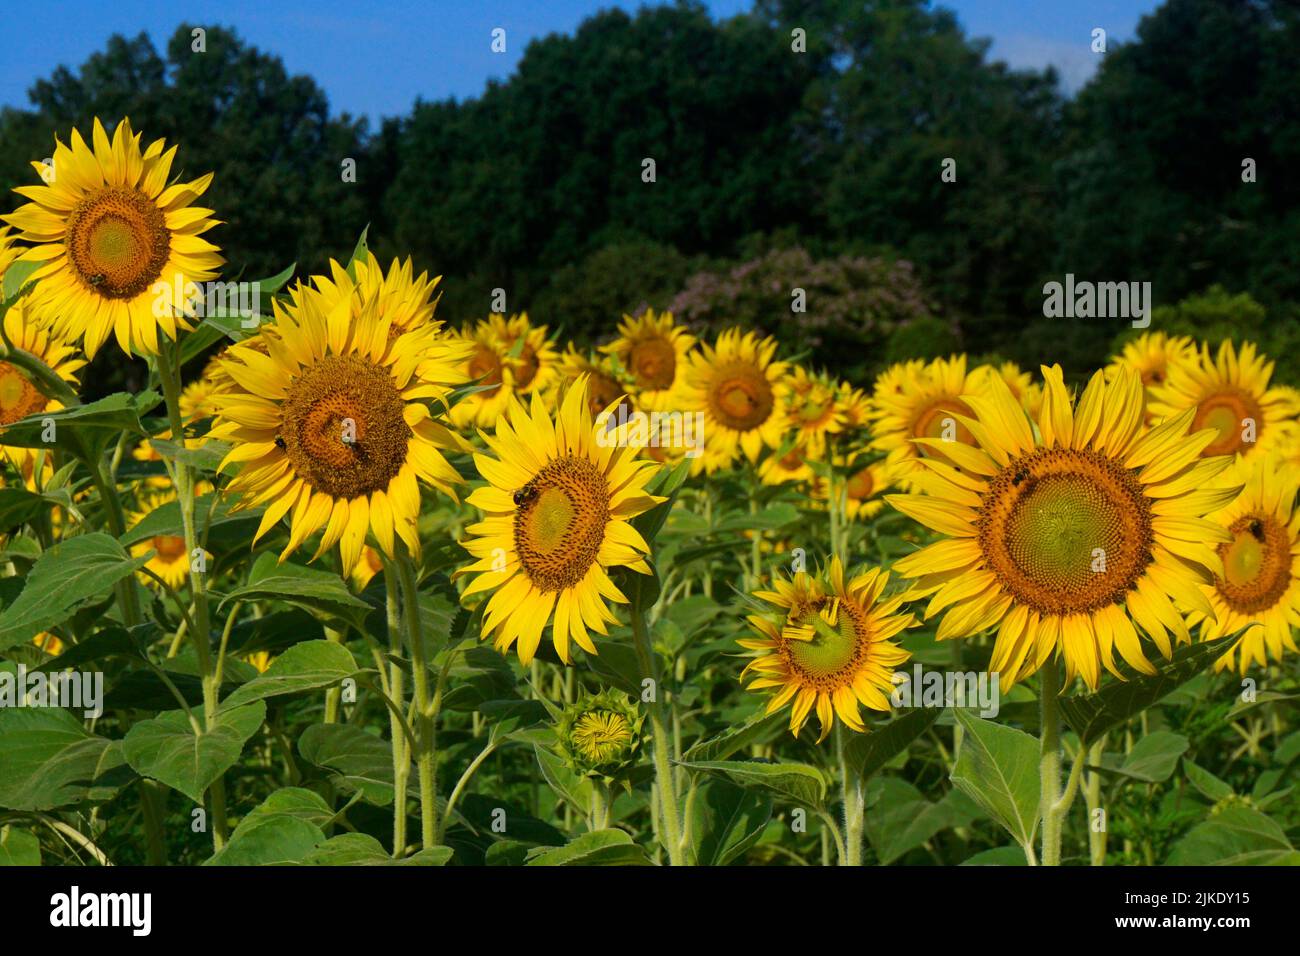 Selective focus on a row of sunflowers being visited by bumble bees on a summer day Stock Photo